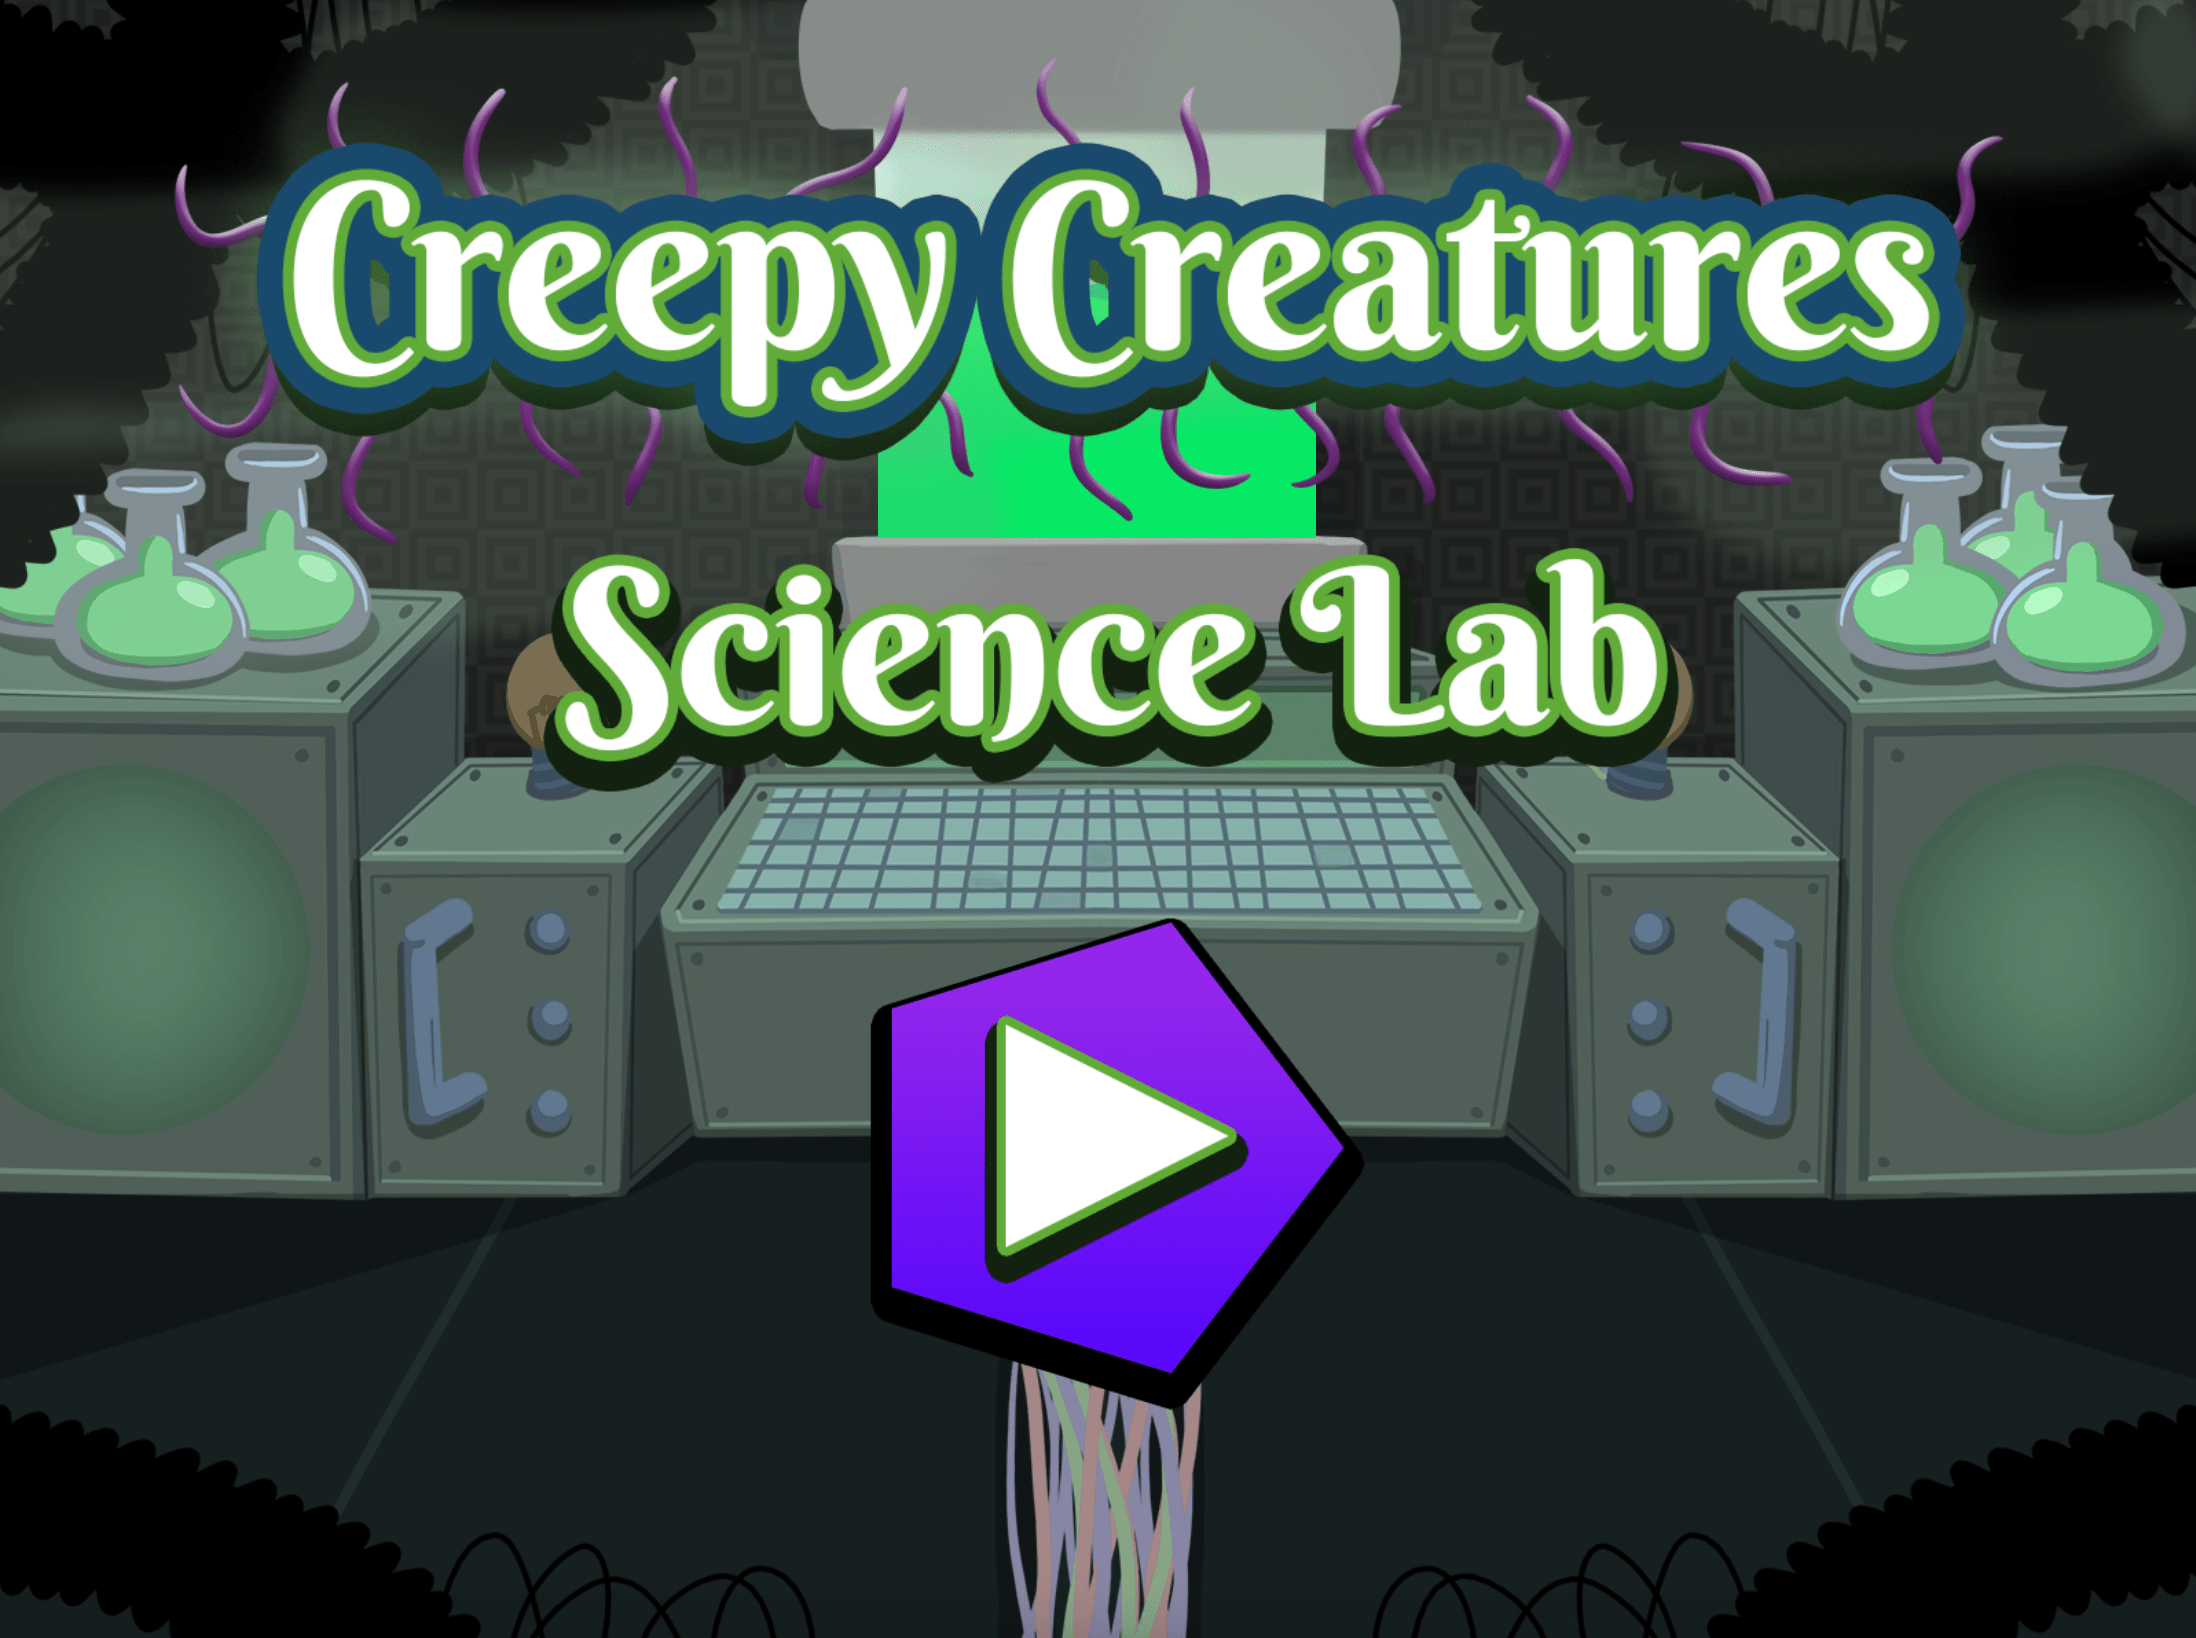 The title screen of a game featuring a dark science lab and a large play button.